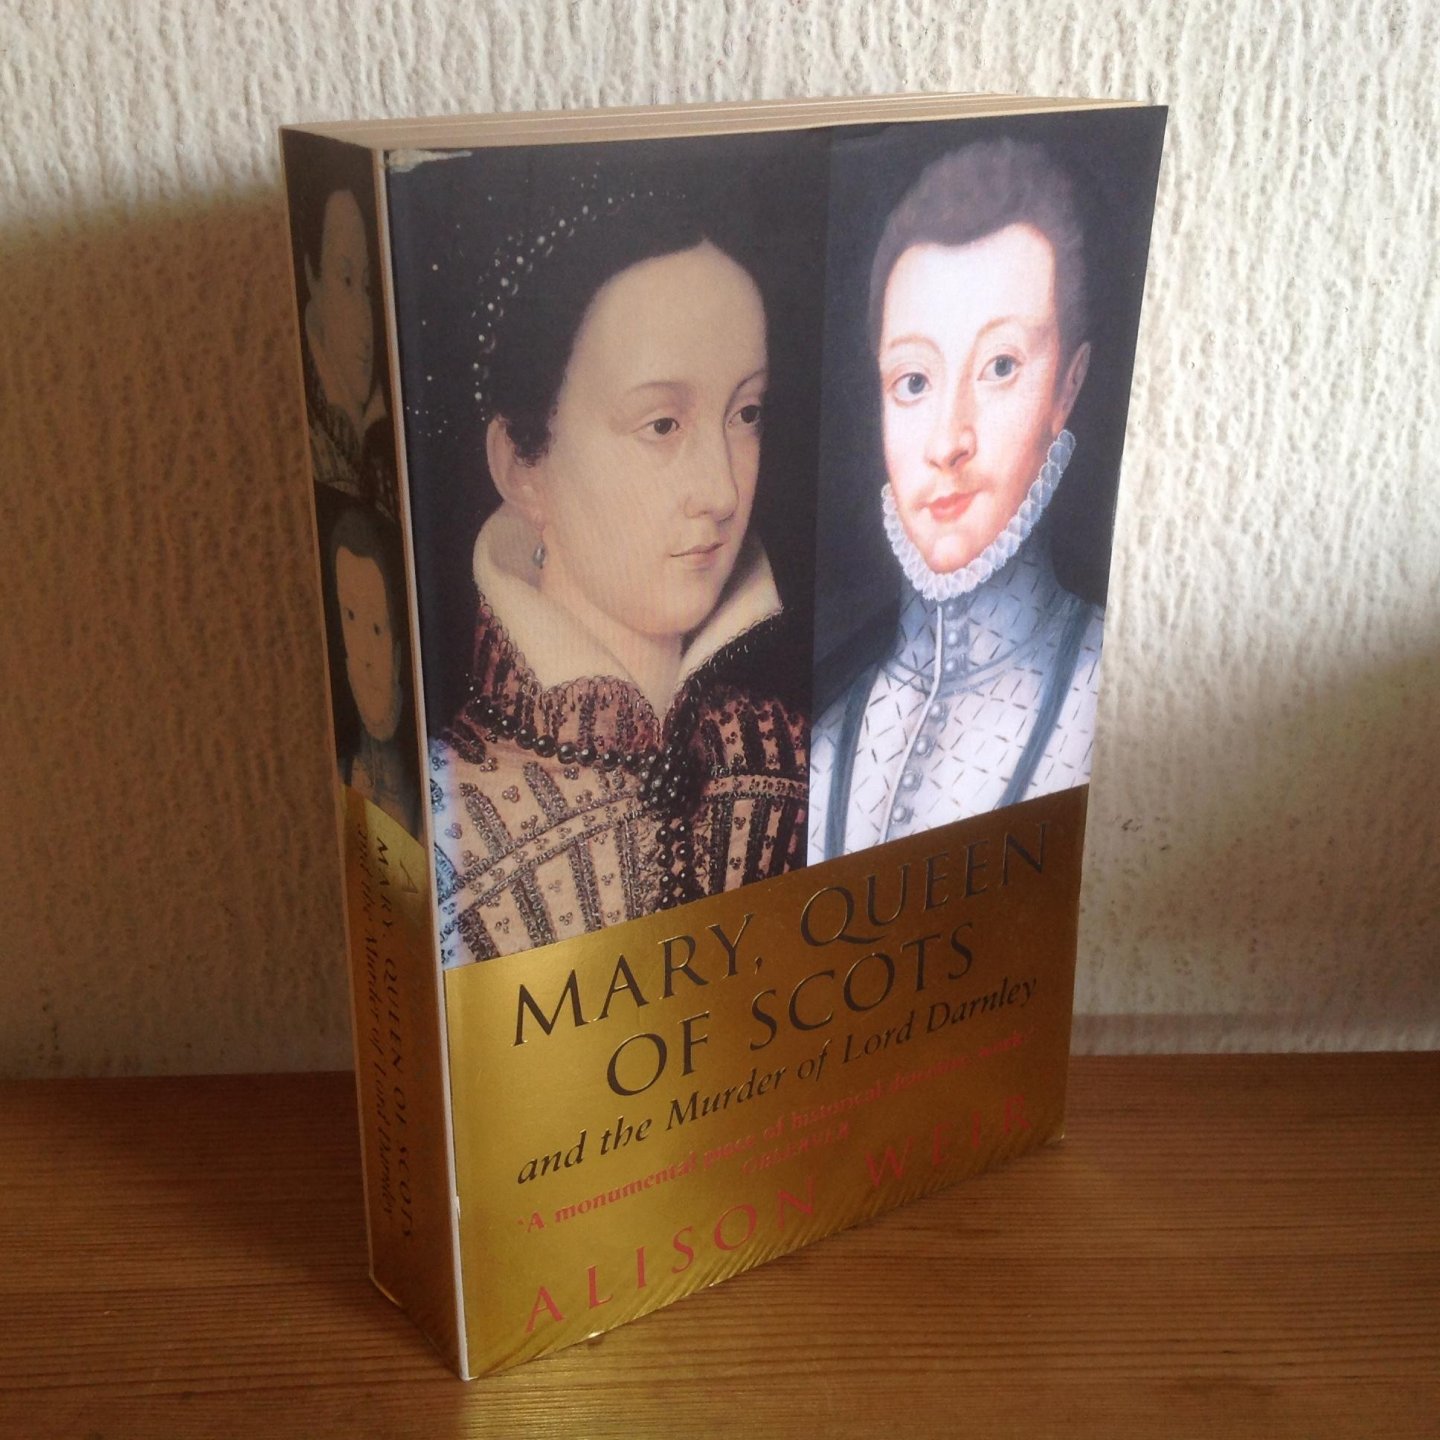 Weir, Alison - Mary Queen of Scots and the Murder of Lord Darnley